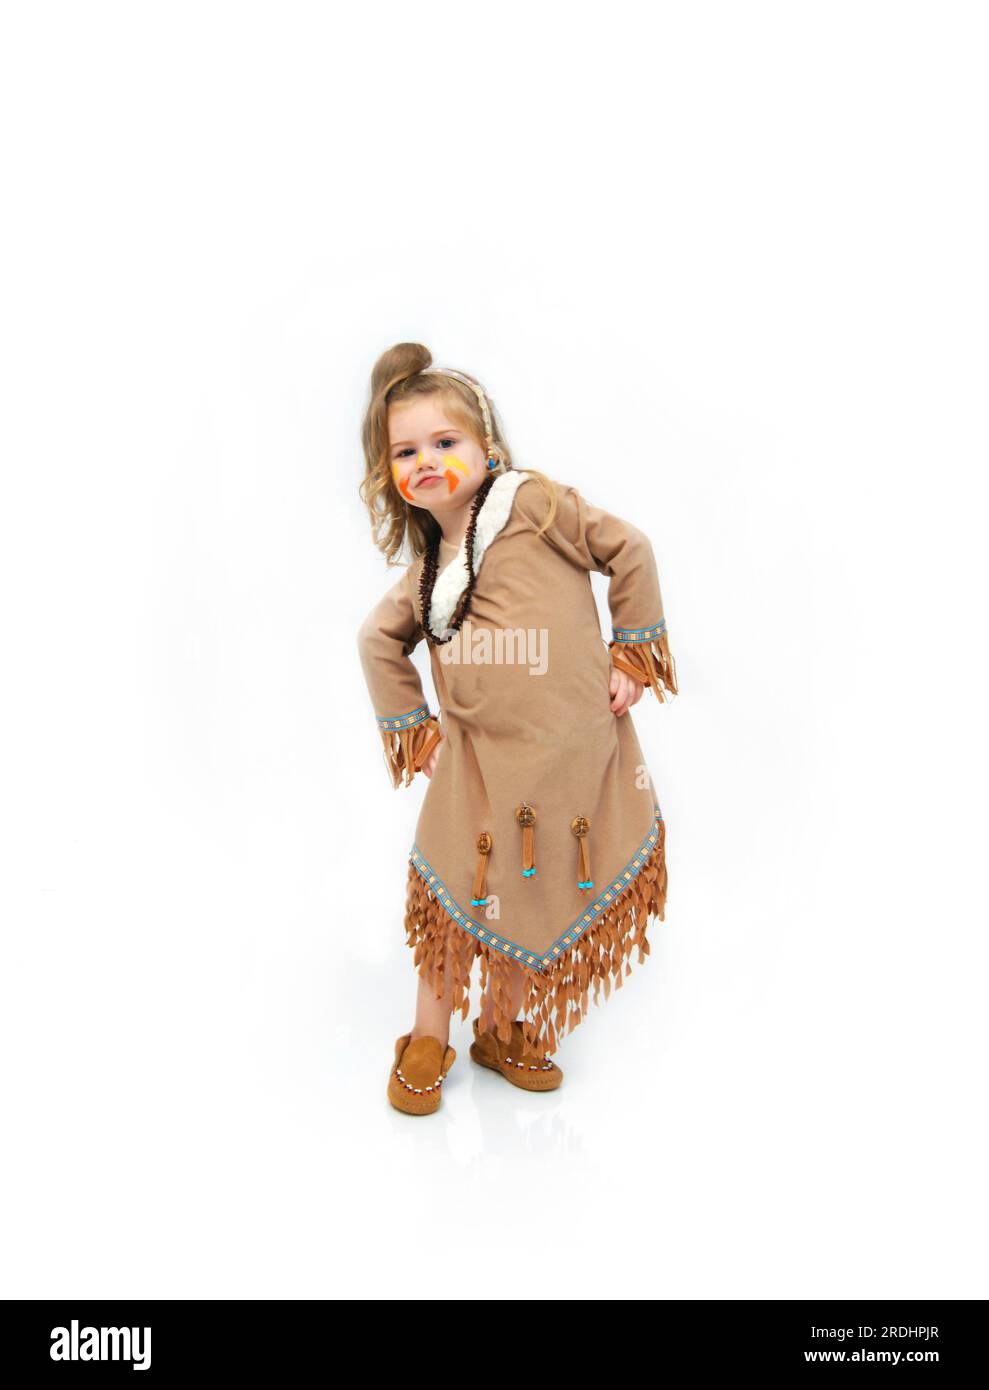 Adorable indian princess wearing fringed leather dress and moccasins, dances a rain dance or war dance.  Her face is comical and her hands are on her Stock Photo